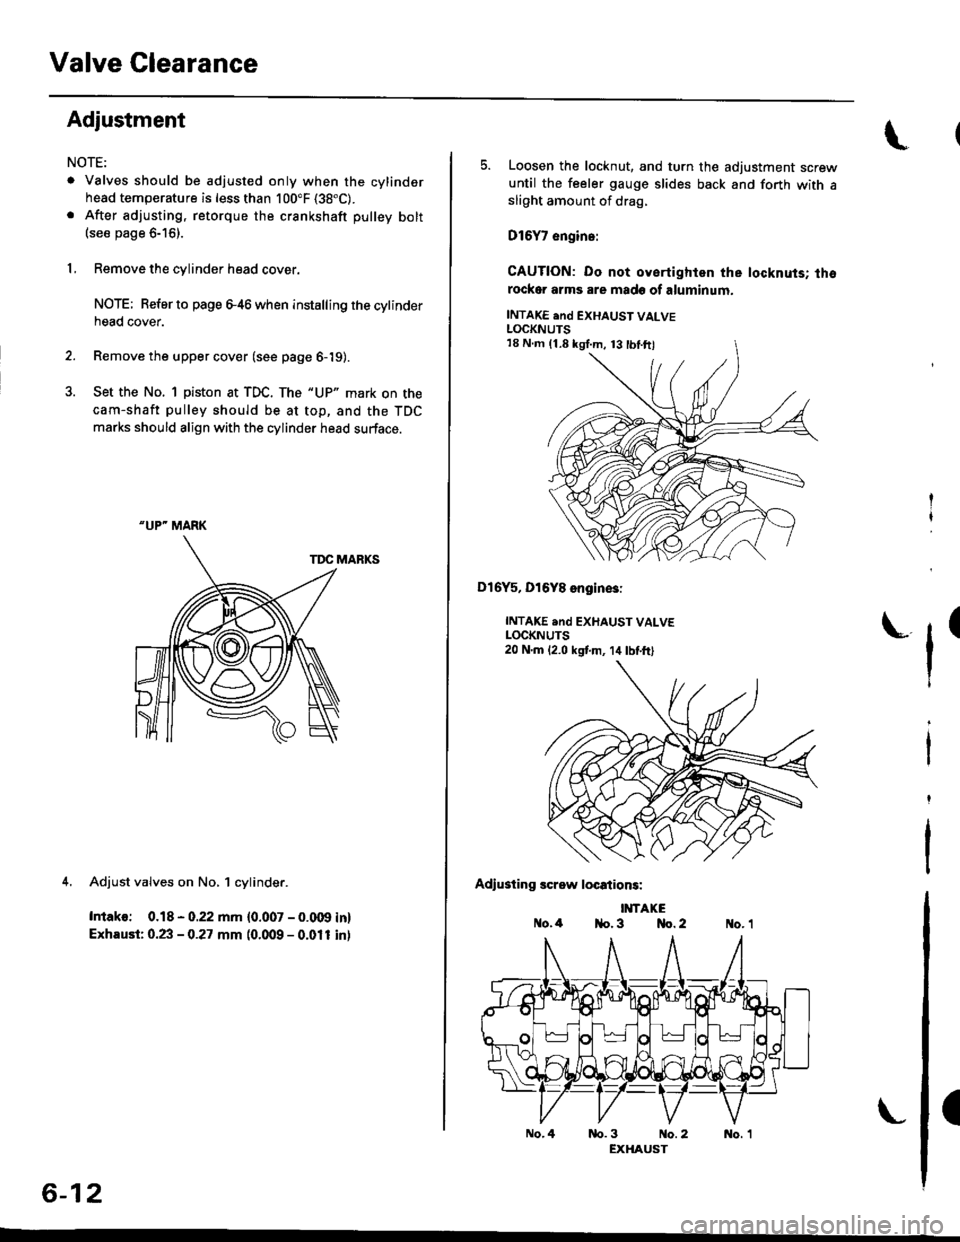 HONDA CIVIC 1998 6.G Workshop Manual Valve Clearance
Adjustment
NOTE:
. Valves should be adjusted only when the cylindsrhead temperature is less than 100"F (38"C).
. After adjusting, retorque the crankshaft pulley bolt(see page 6-16).
1,